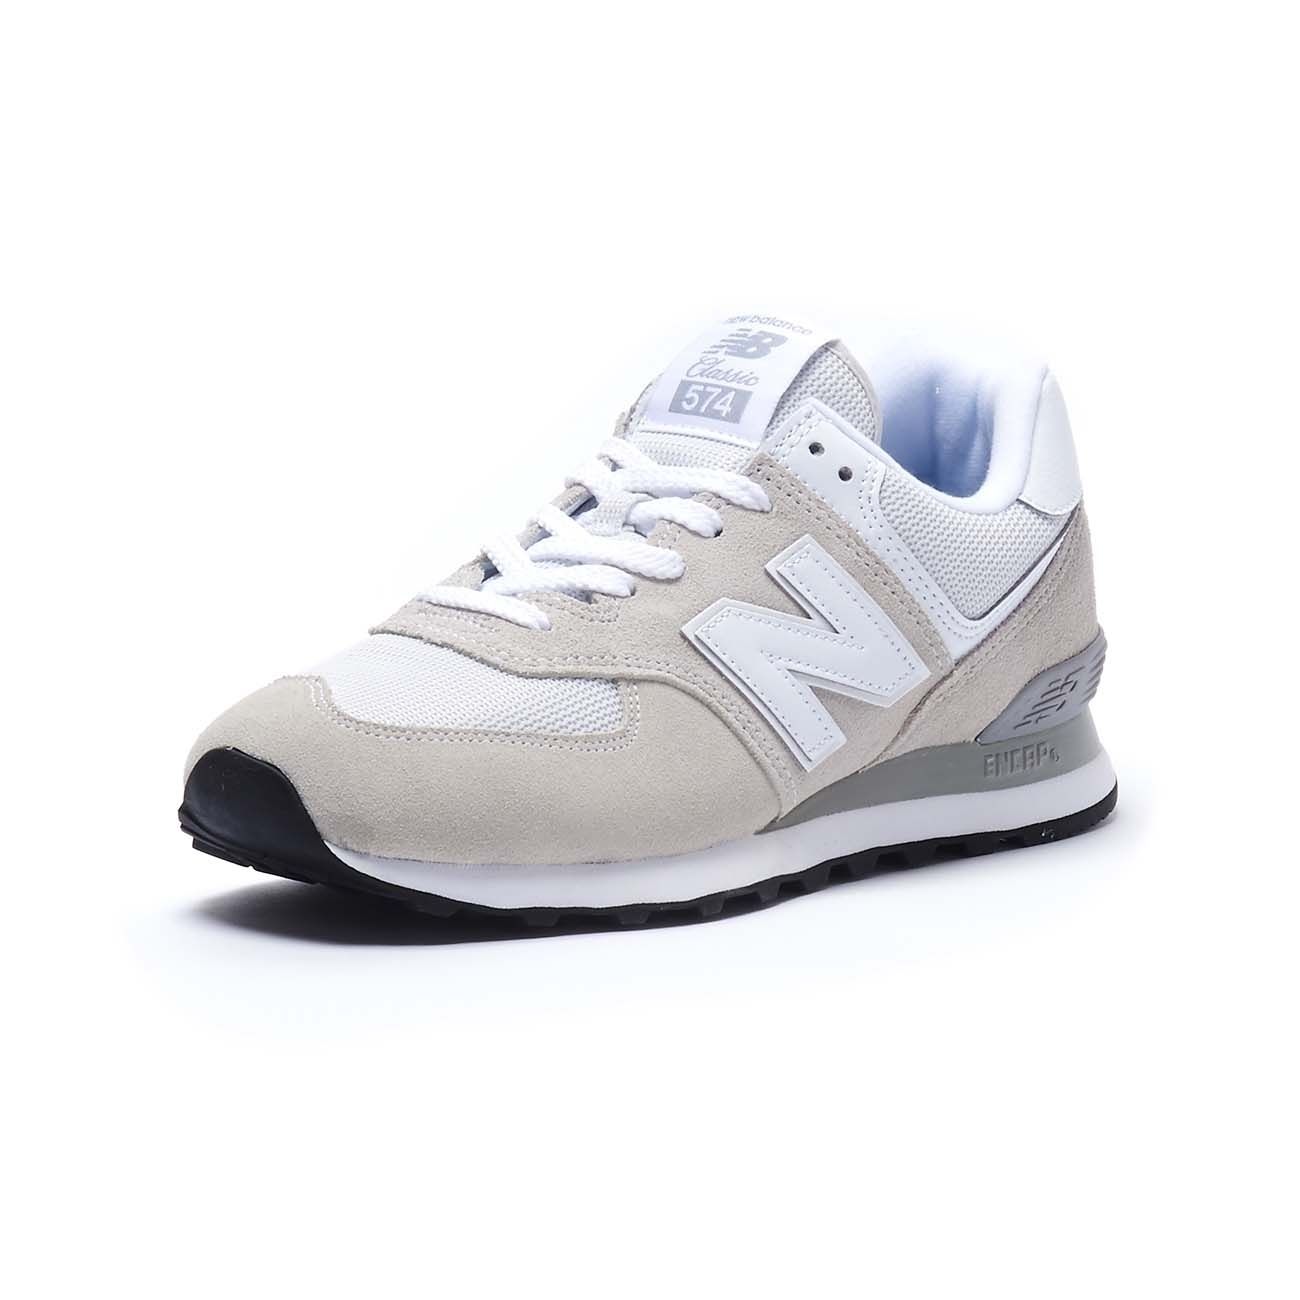 NEW BALANCE SNEAKERS 574 LIFESTYLE SUEDE MESH TRADITIONNELS Uomo Nimbus ...